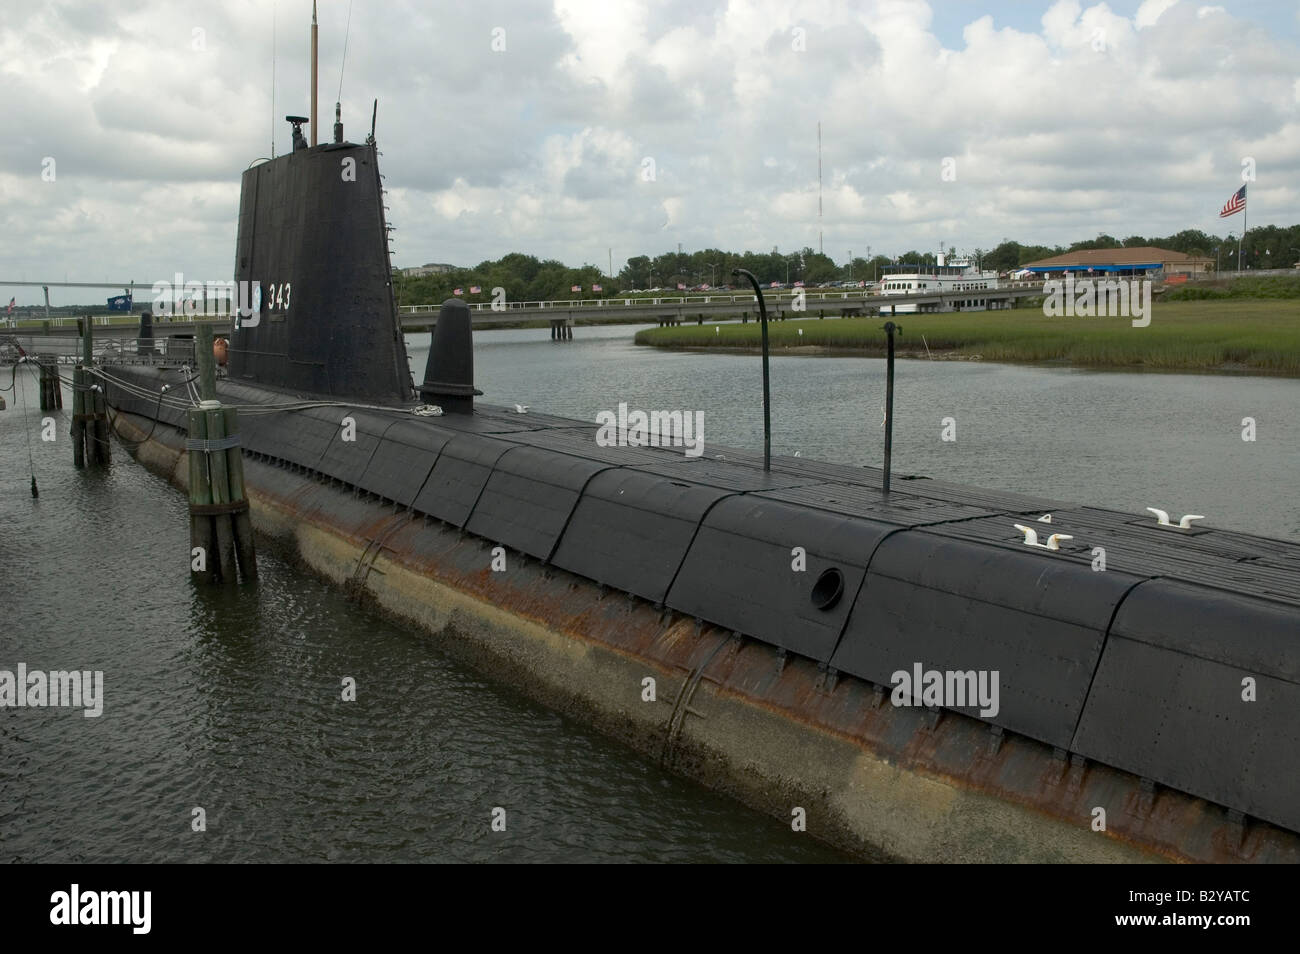 The USS Clamagore Submarine on display at the Patriots Point Museum in Charleston SC. Stock Photo